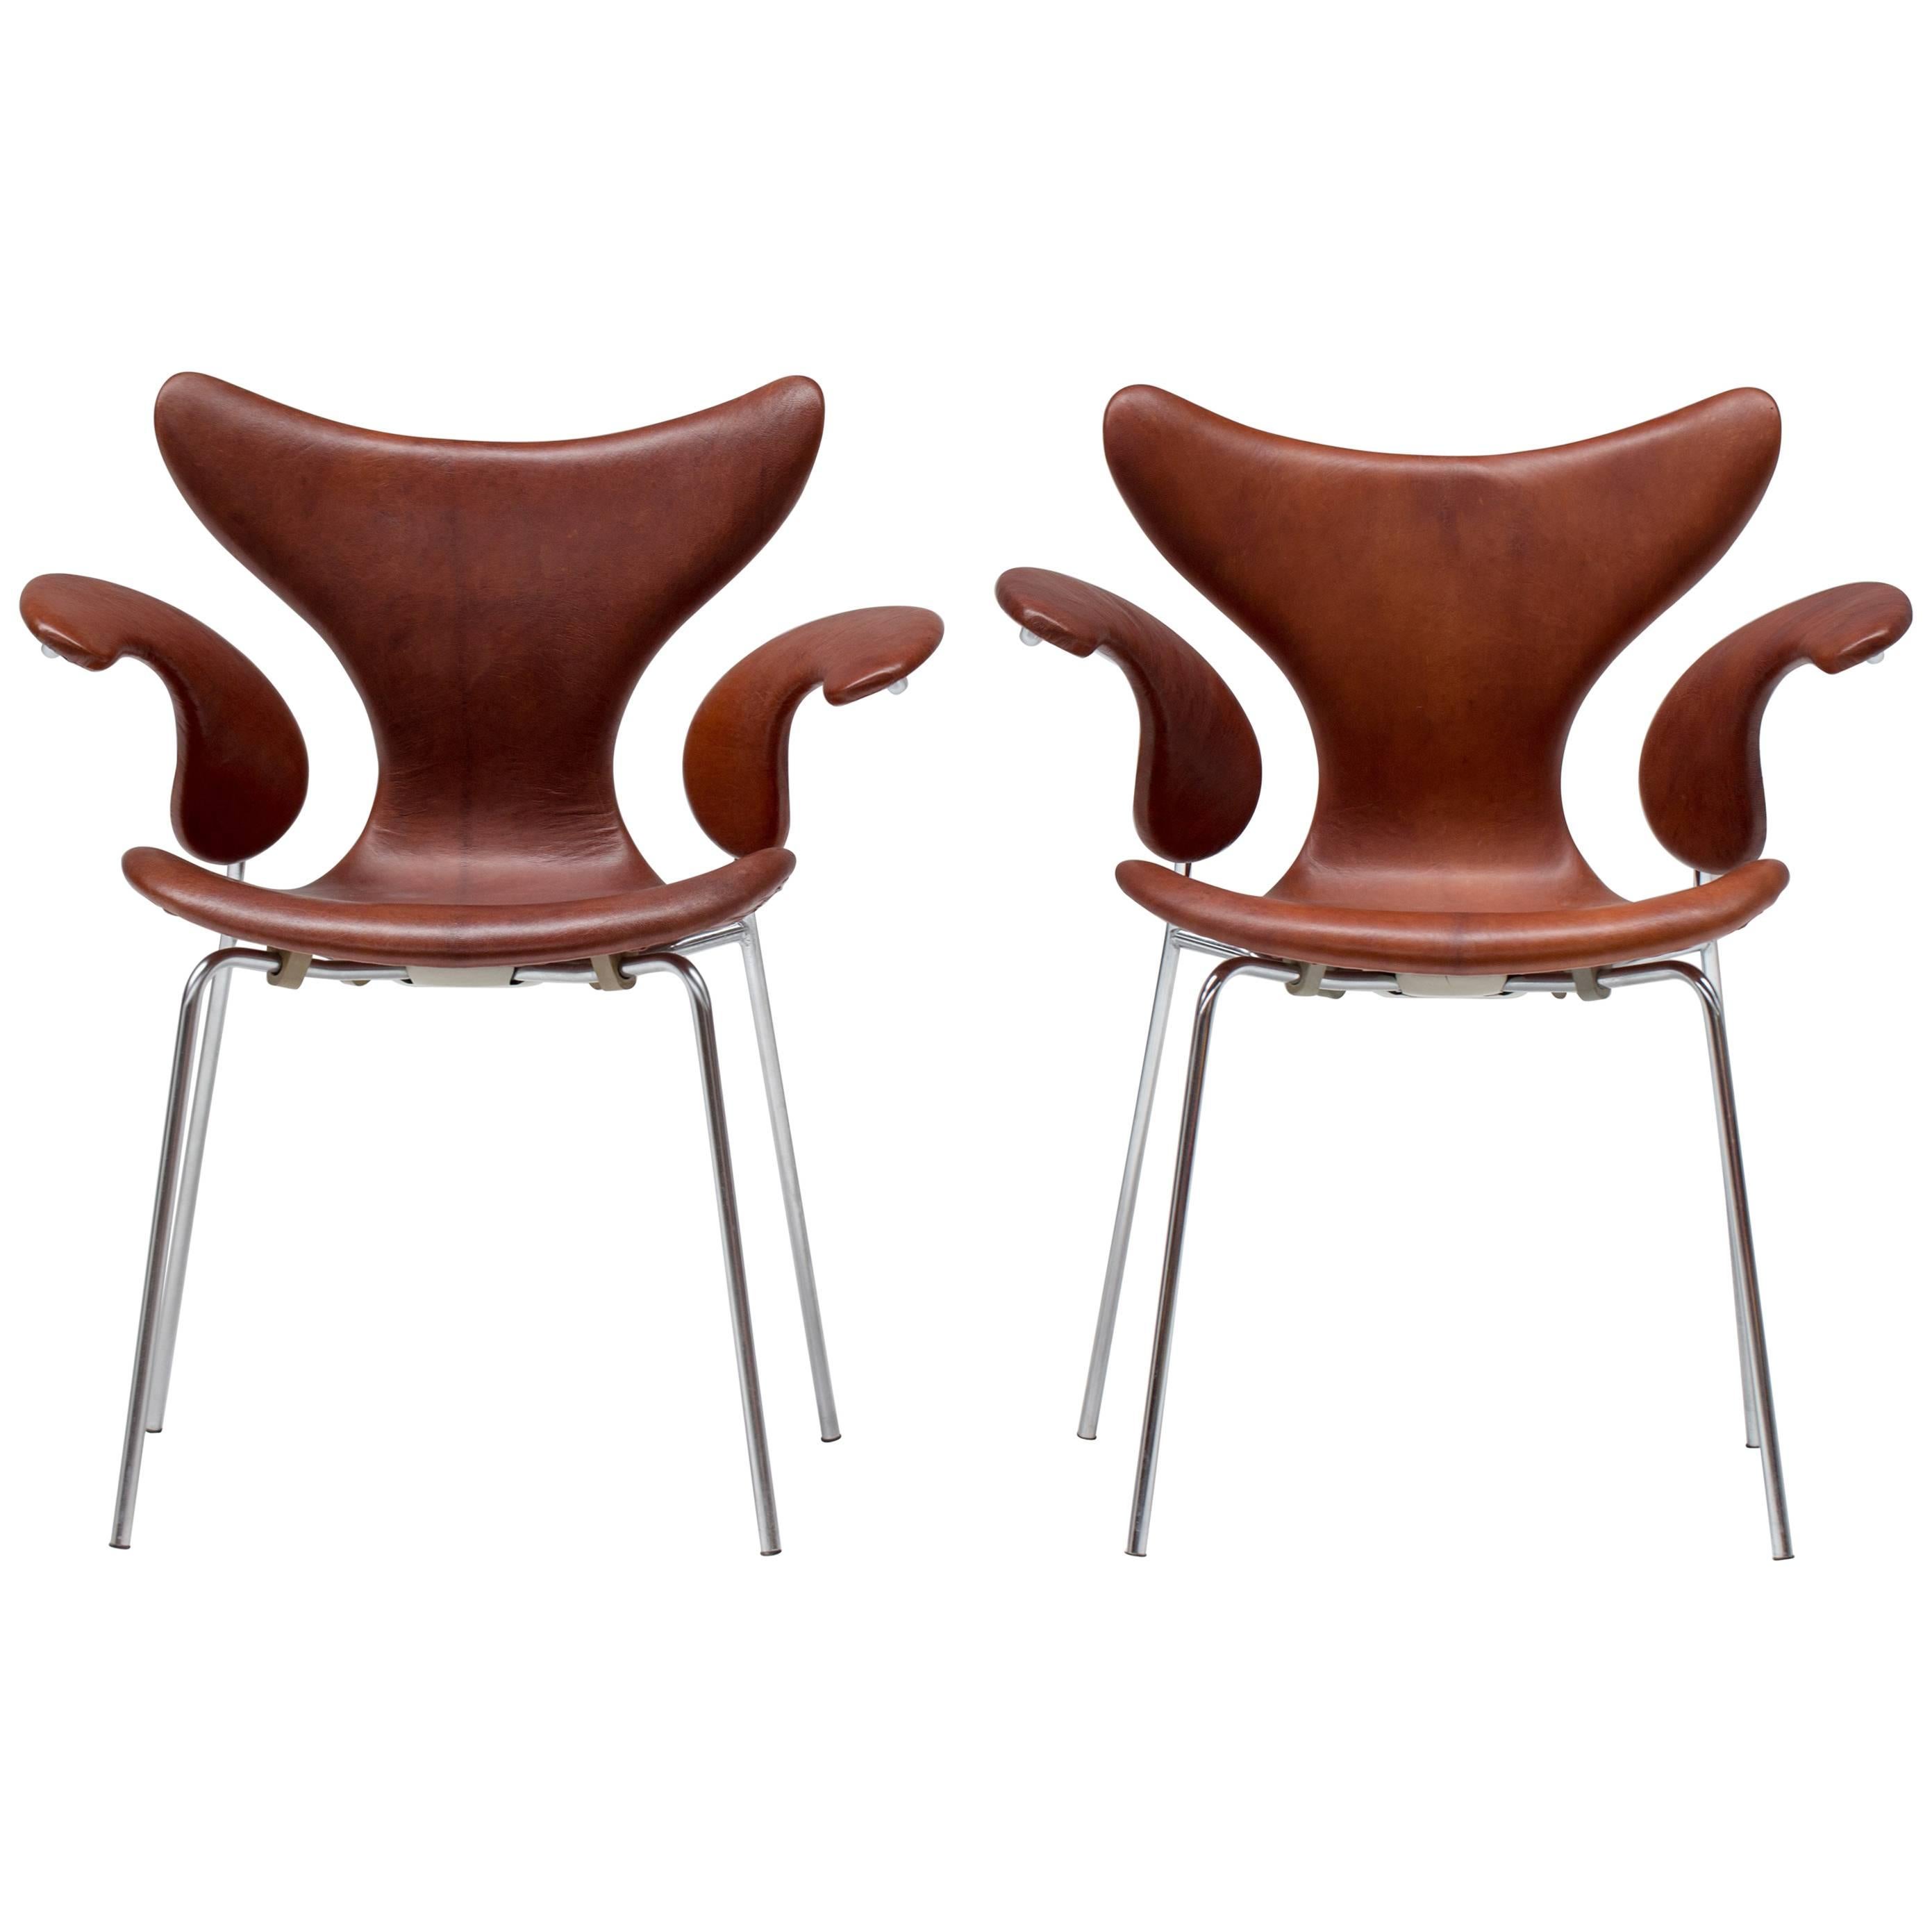 Pair of Leather Seagull Chairs For Sale